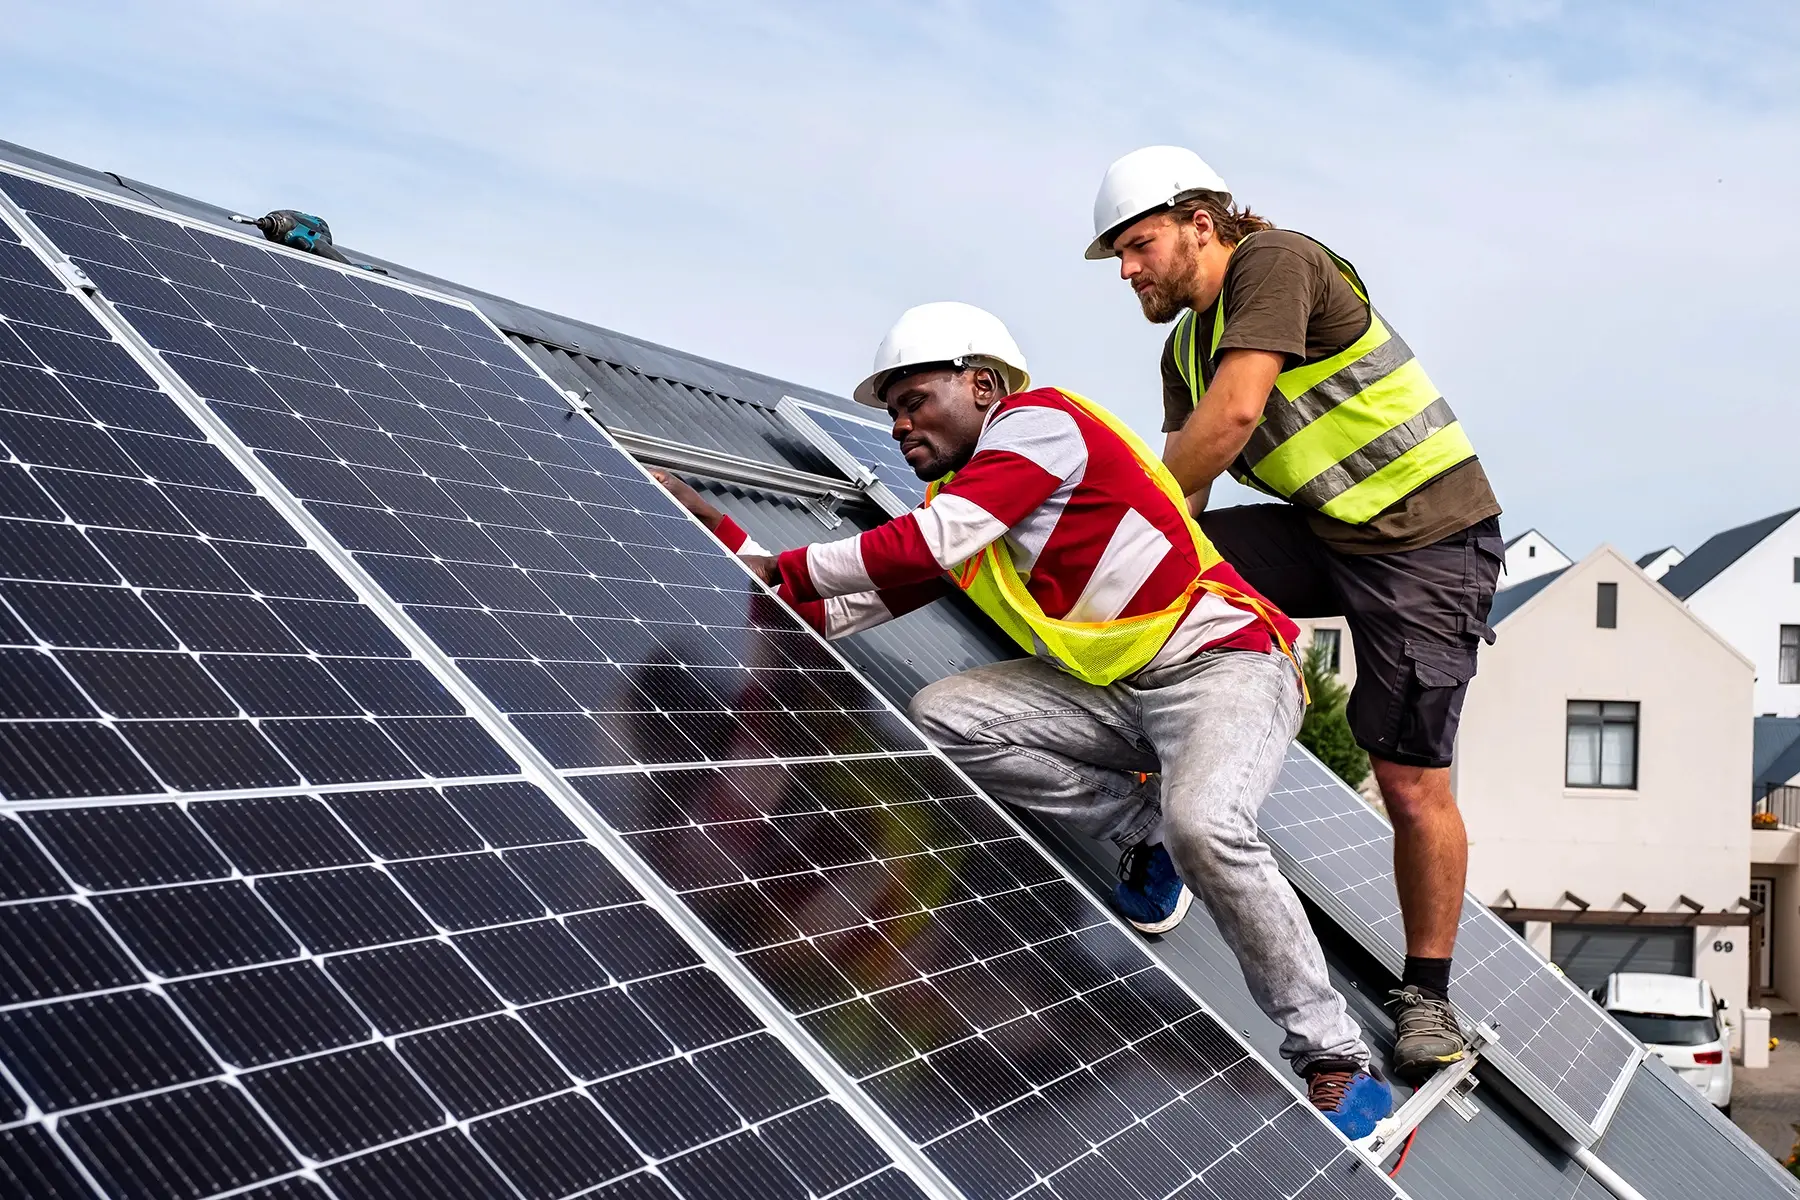 Technicians carefully connect and install solar panels on a residential rooftop on a house in South Africa